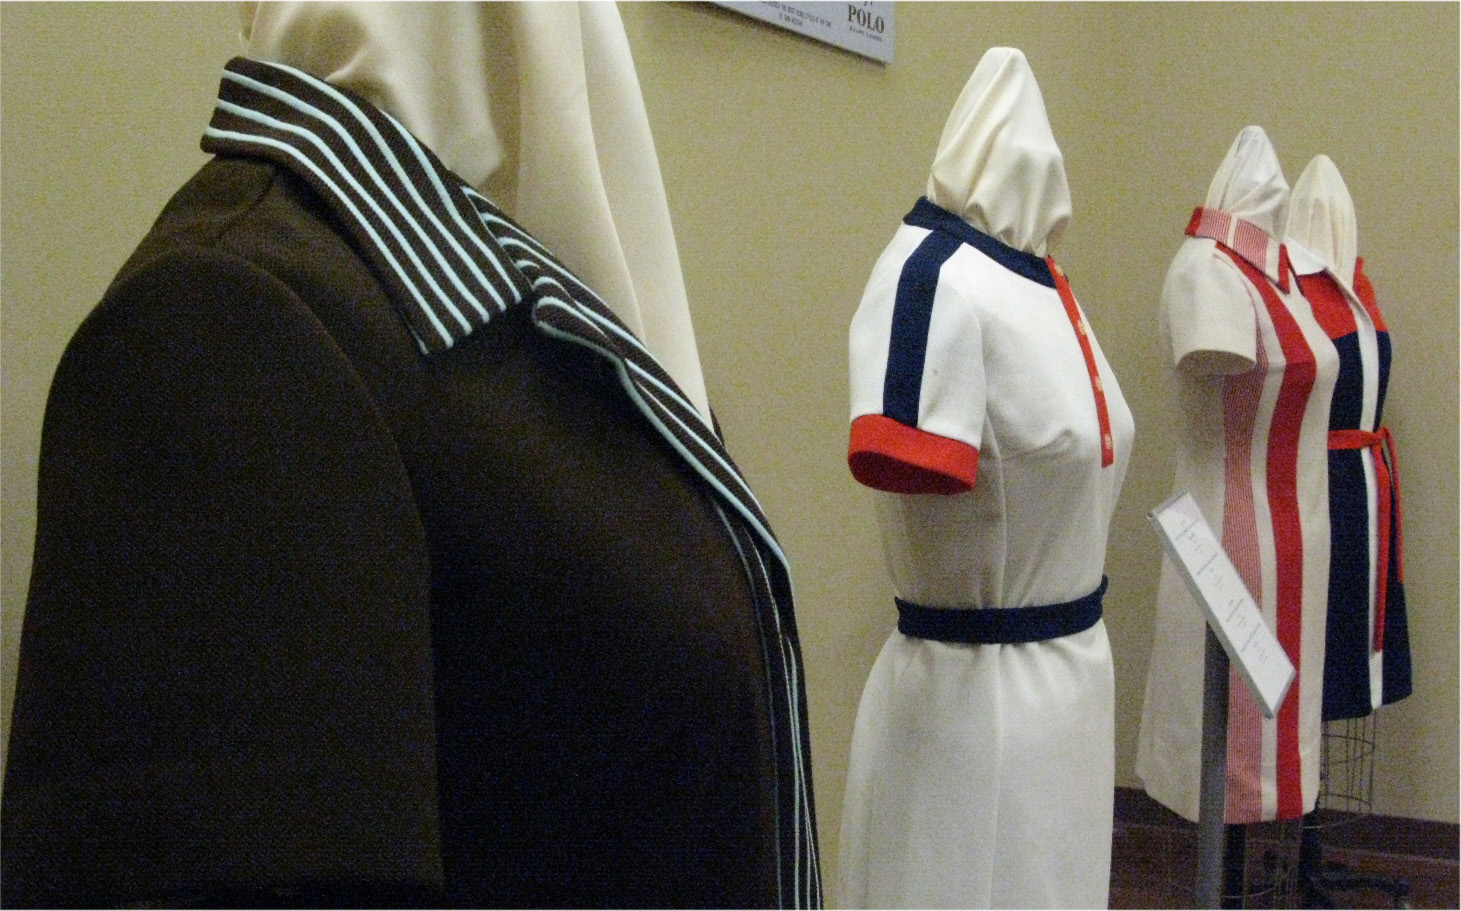 short-sleeved dresses used for tennis in the 1970s on mannequins